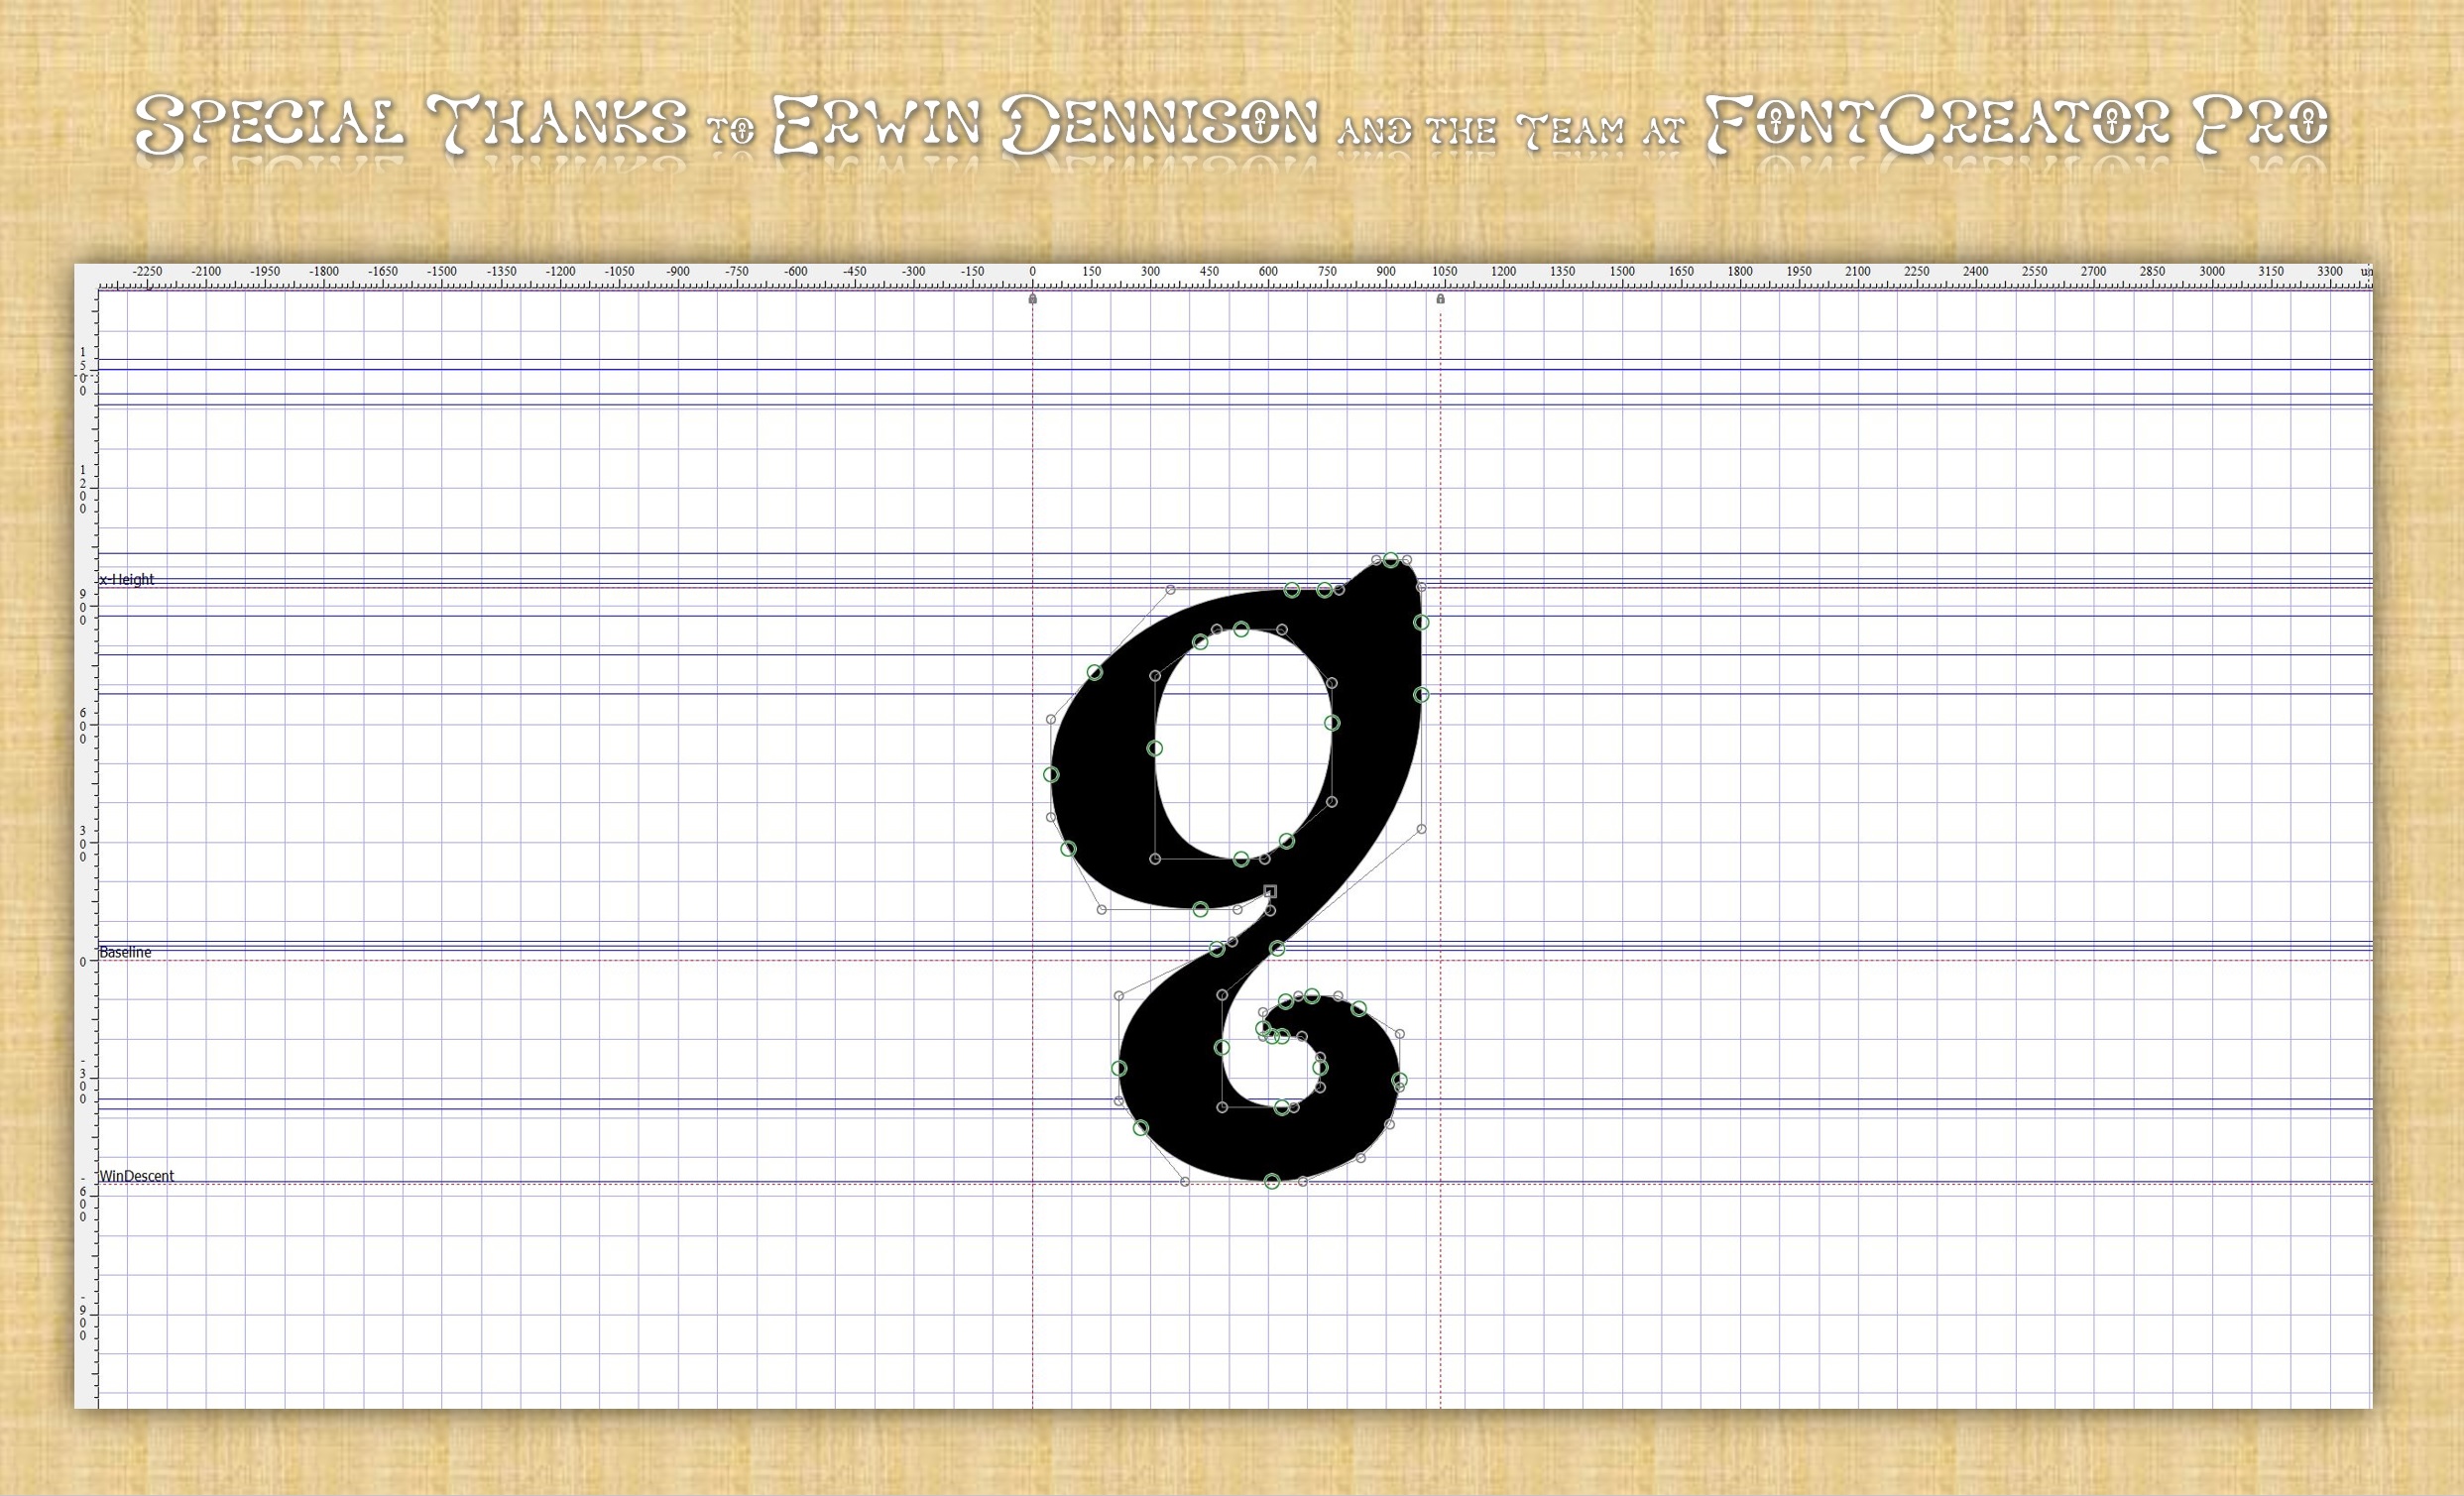 Lowercase q Design and Special Thanks.jpg